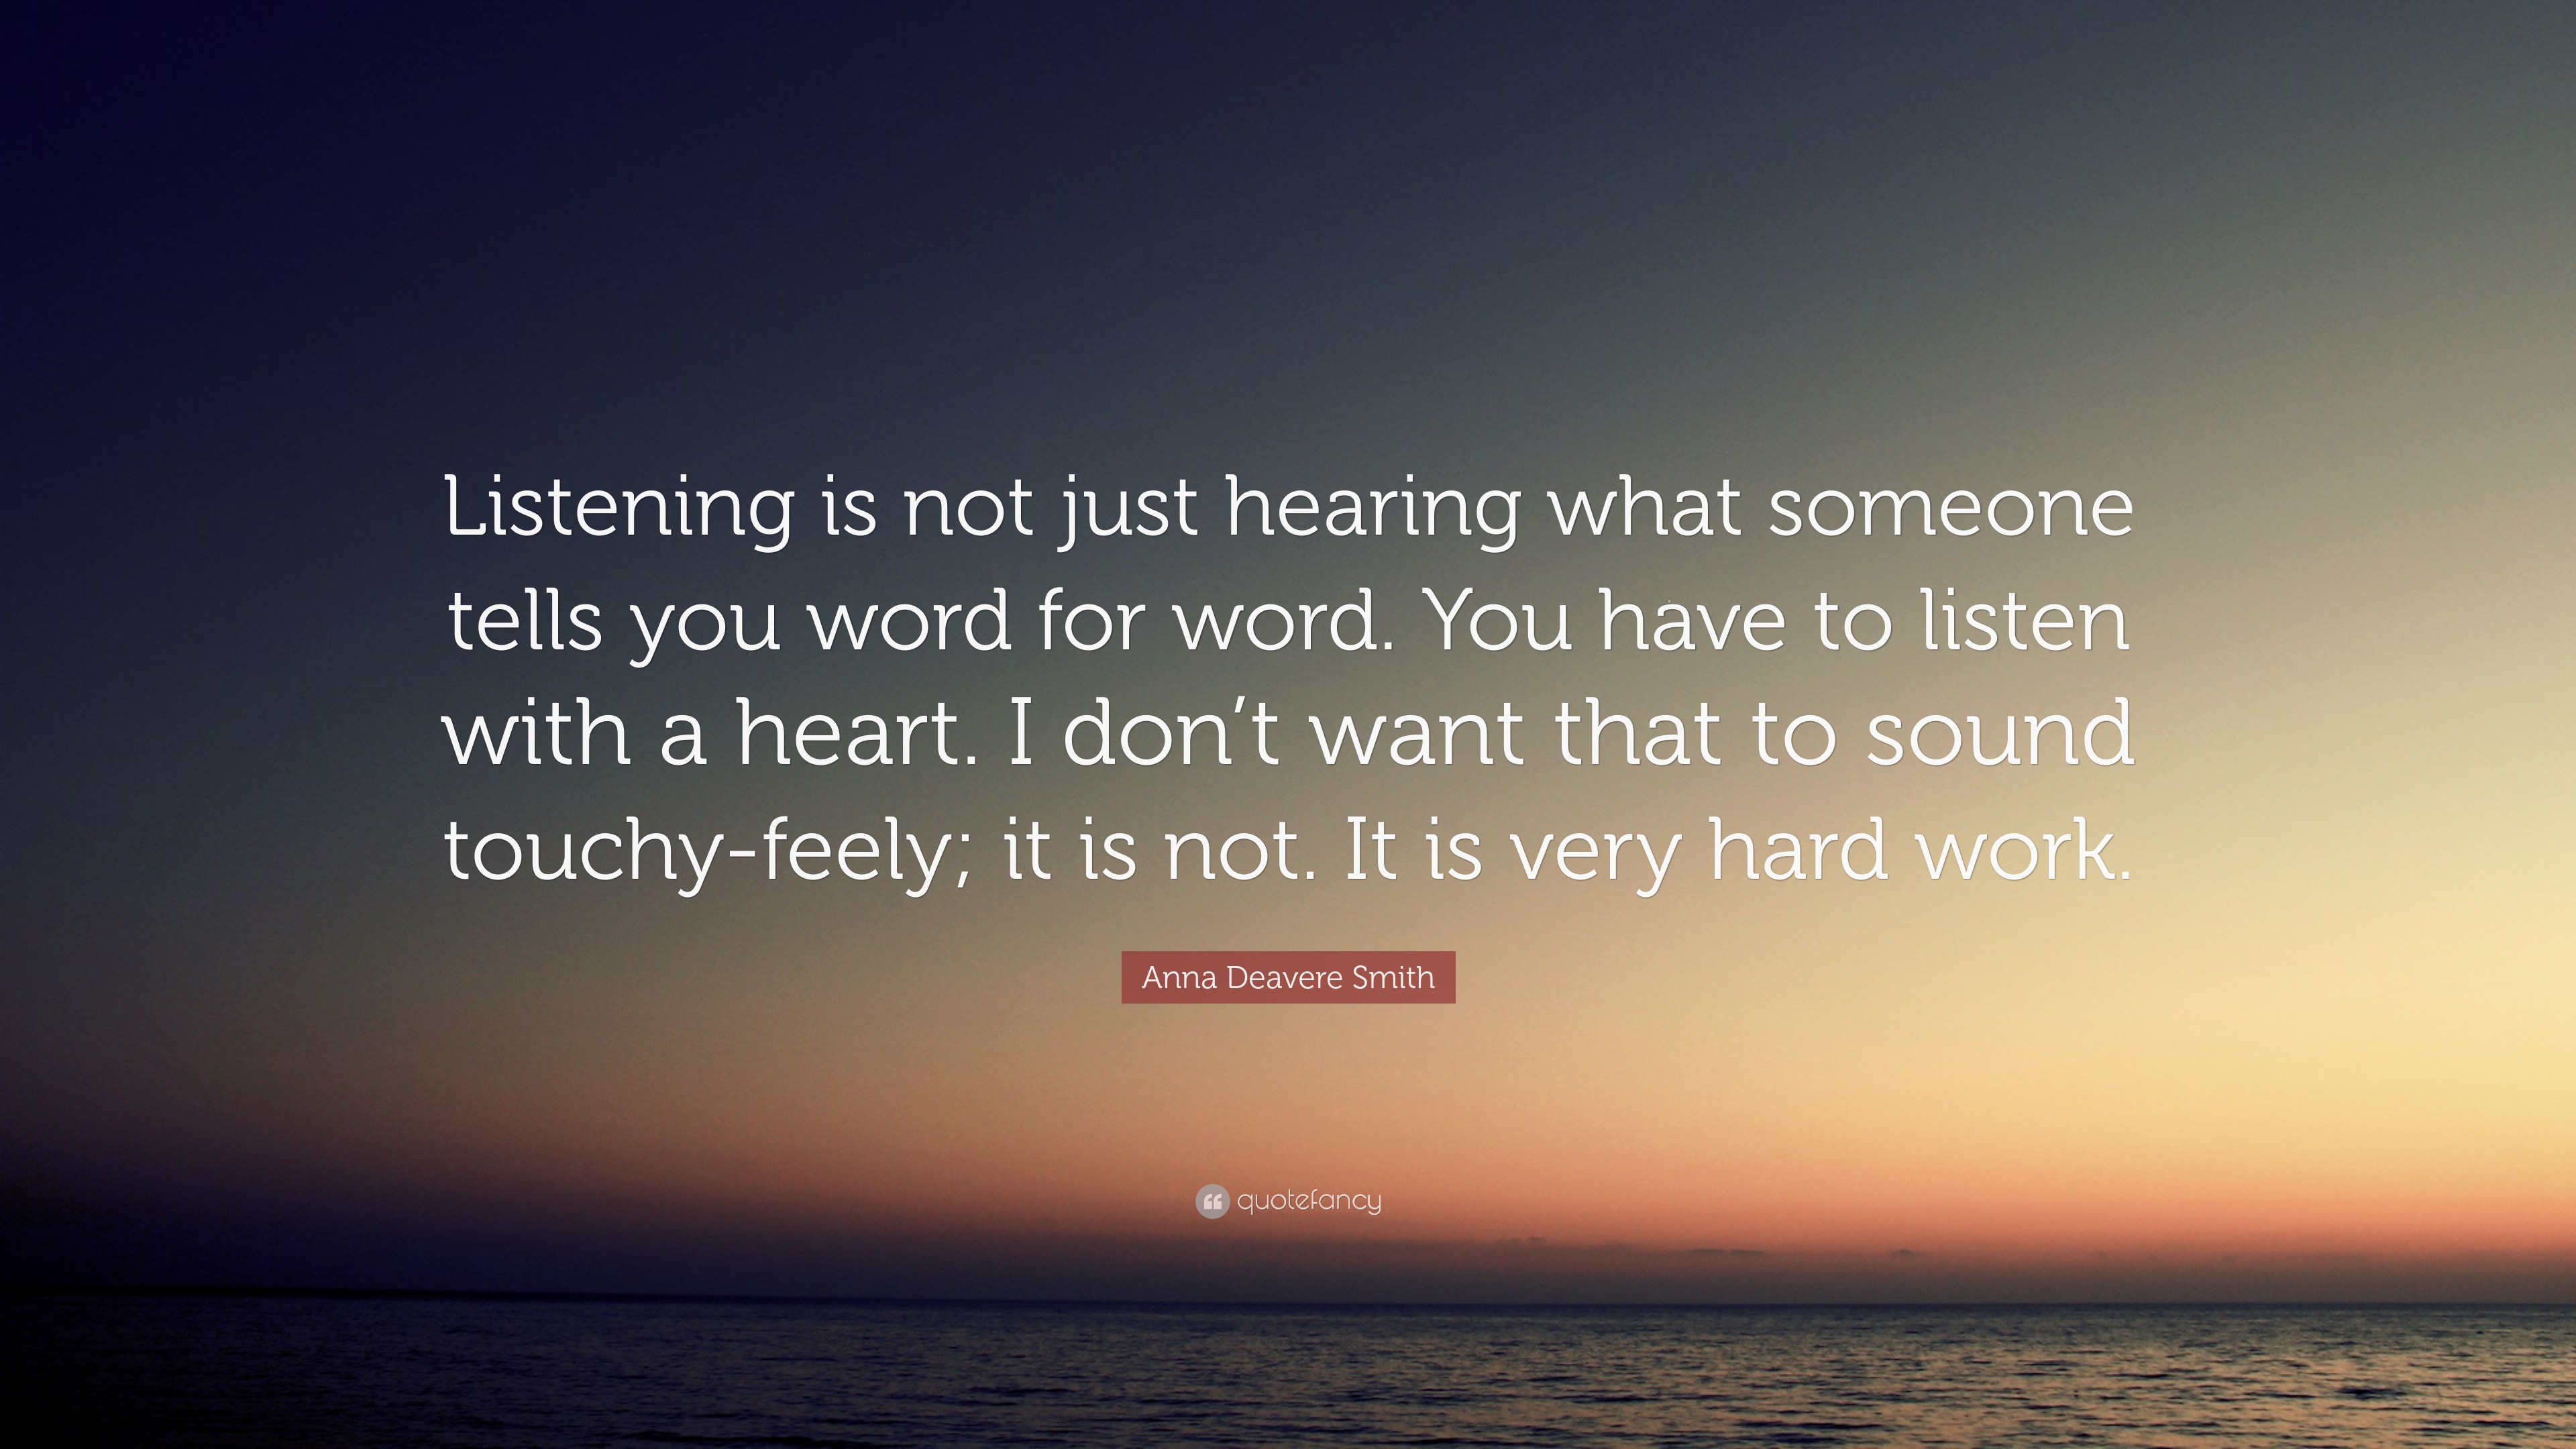 Anna Deavere Smith Quote: “Listening is not just hearing what someone ...